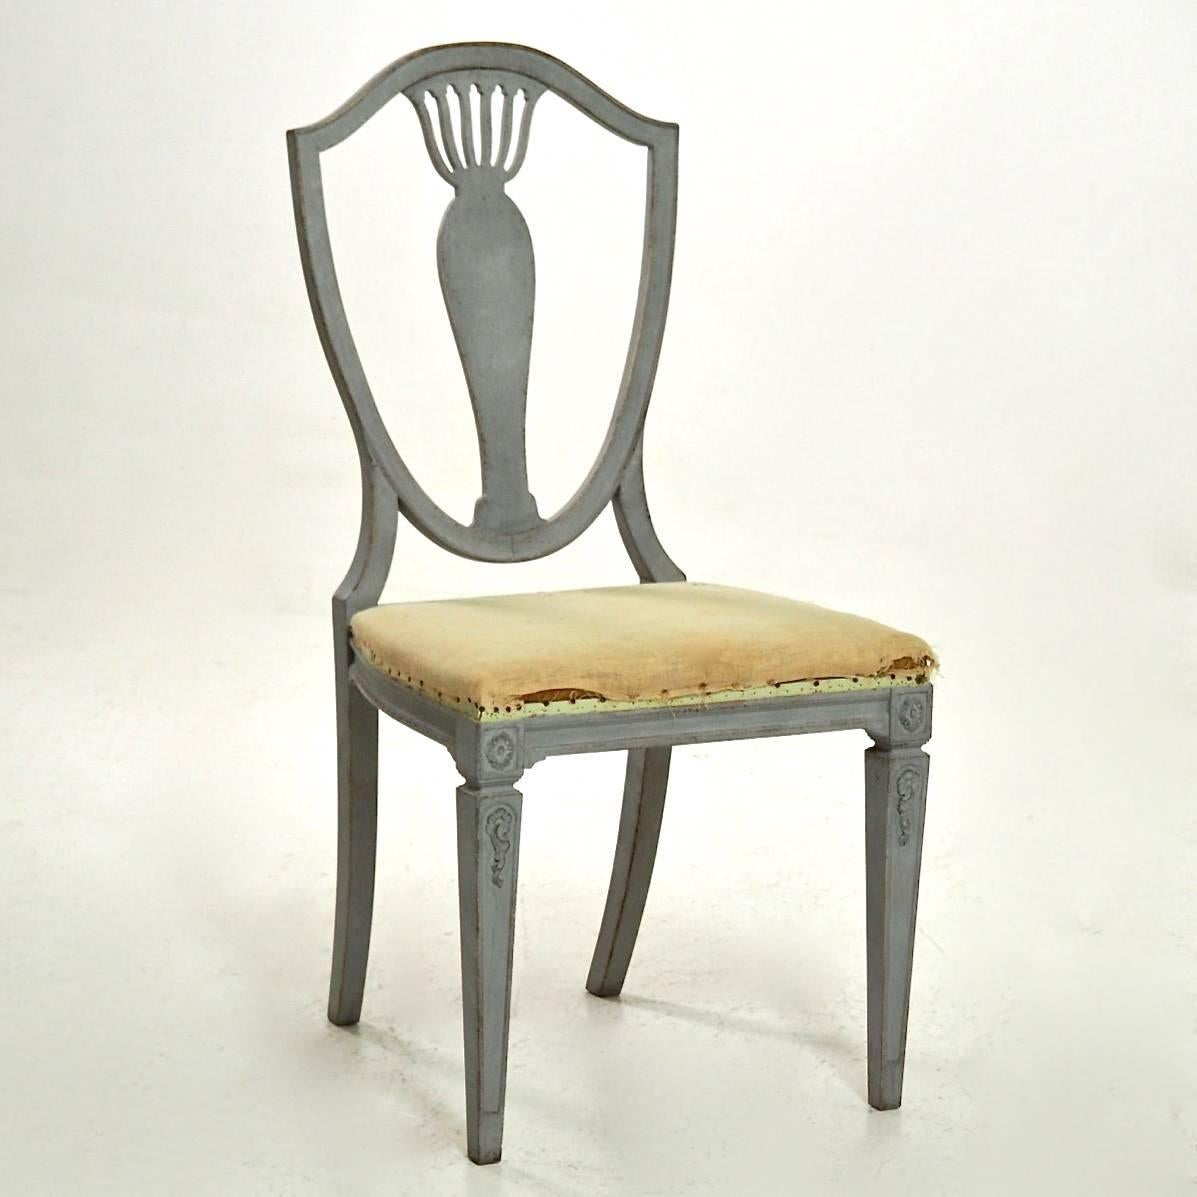 A wonderful set of eight decoratively carved Gustavian style shield back dining chairs ready for upholstery in a beautiful fabric of your choice. These elegant Swedish chairs date from circa 1910.

Continental US shipping:
We ship to the United